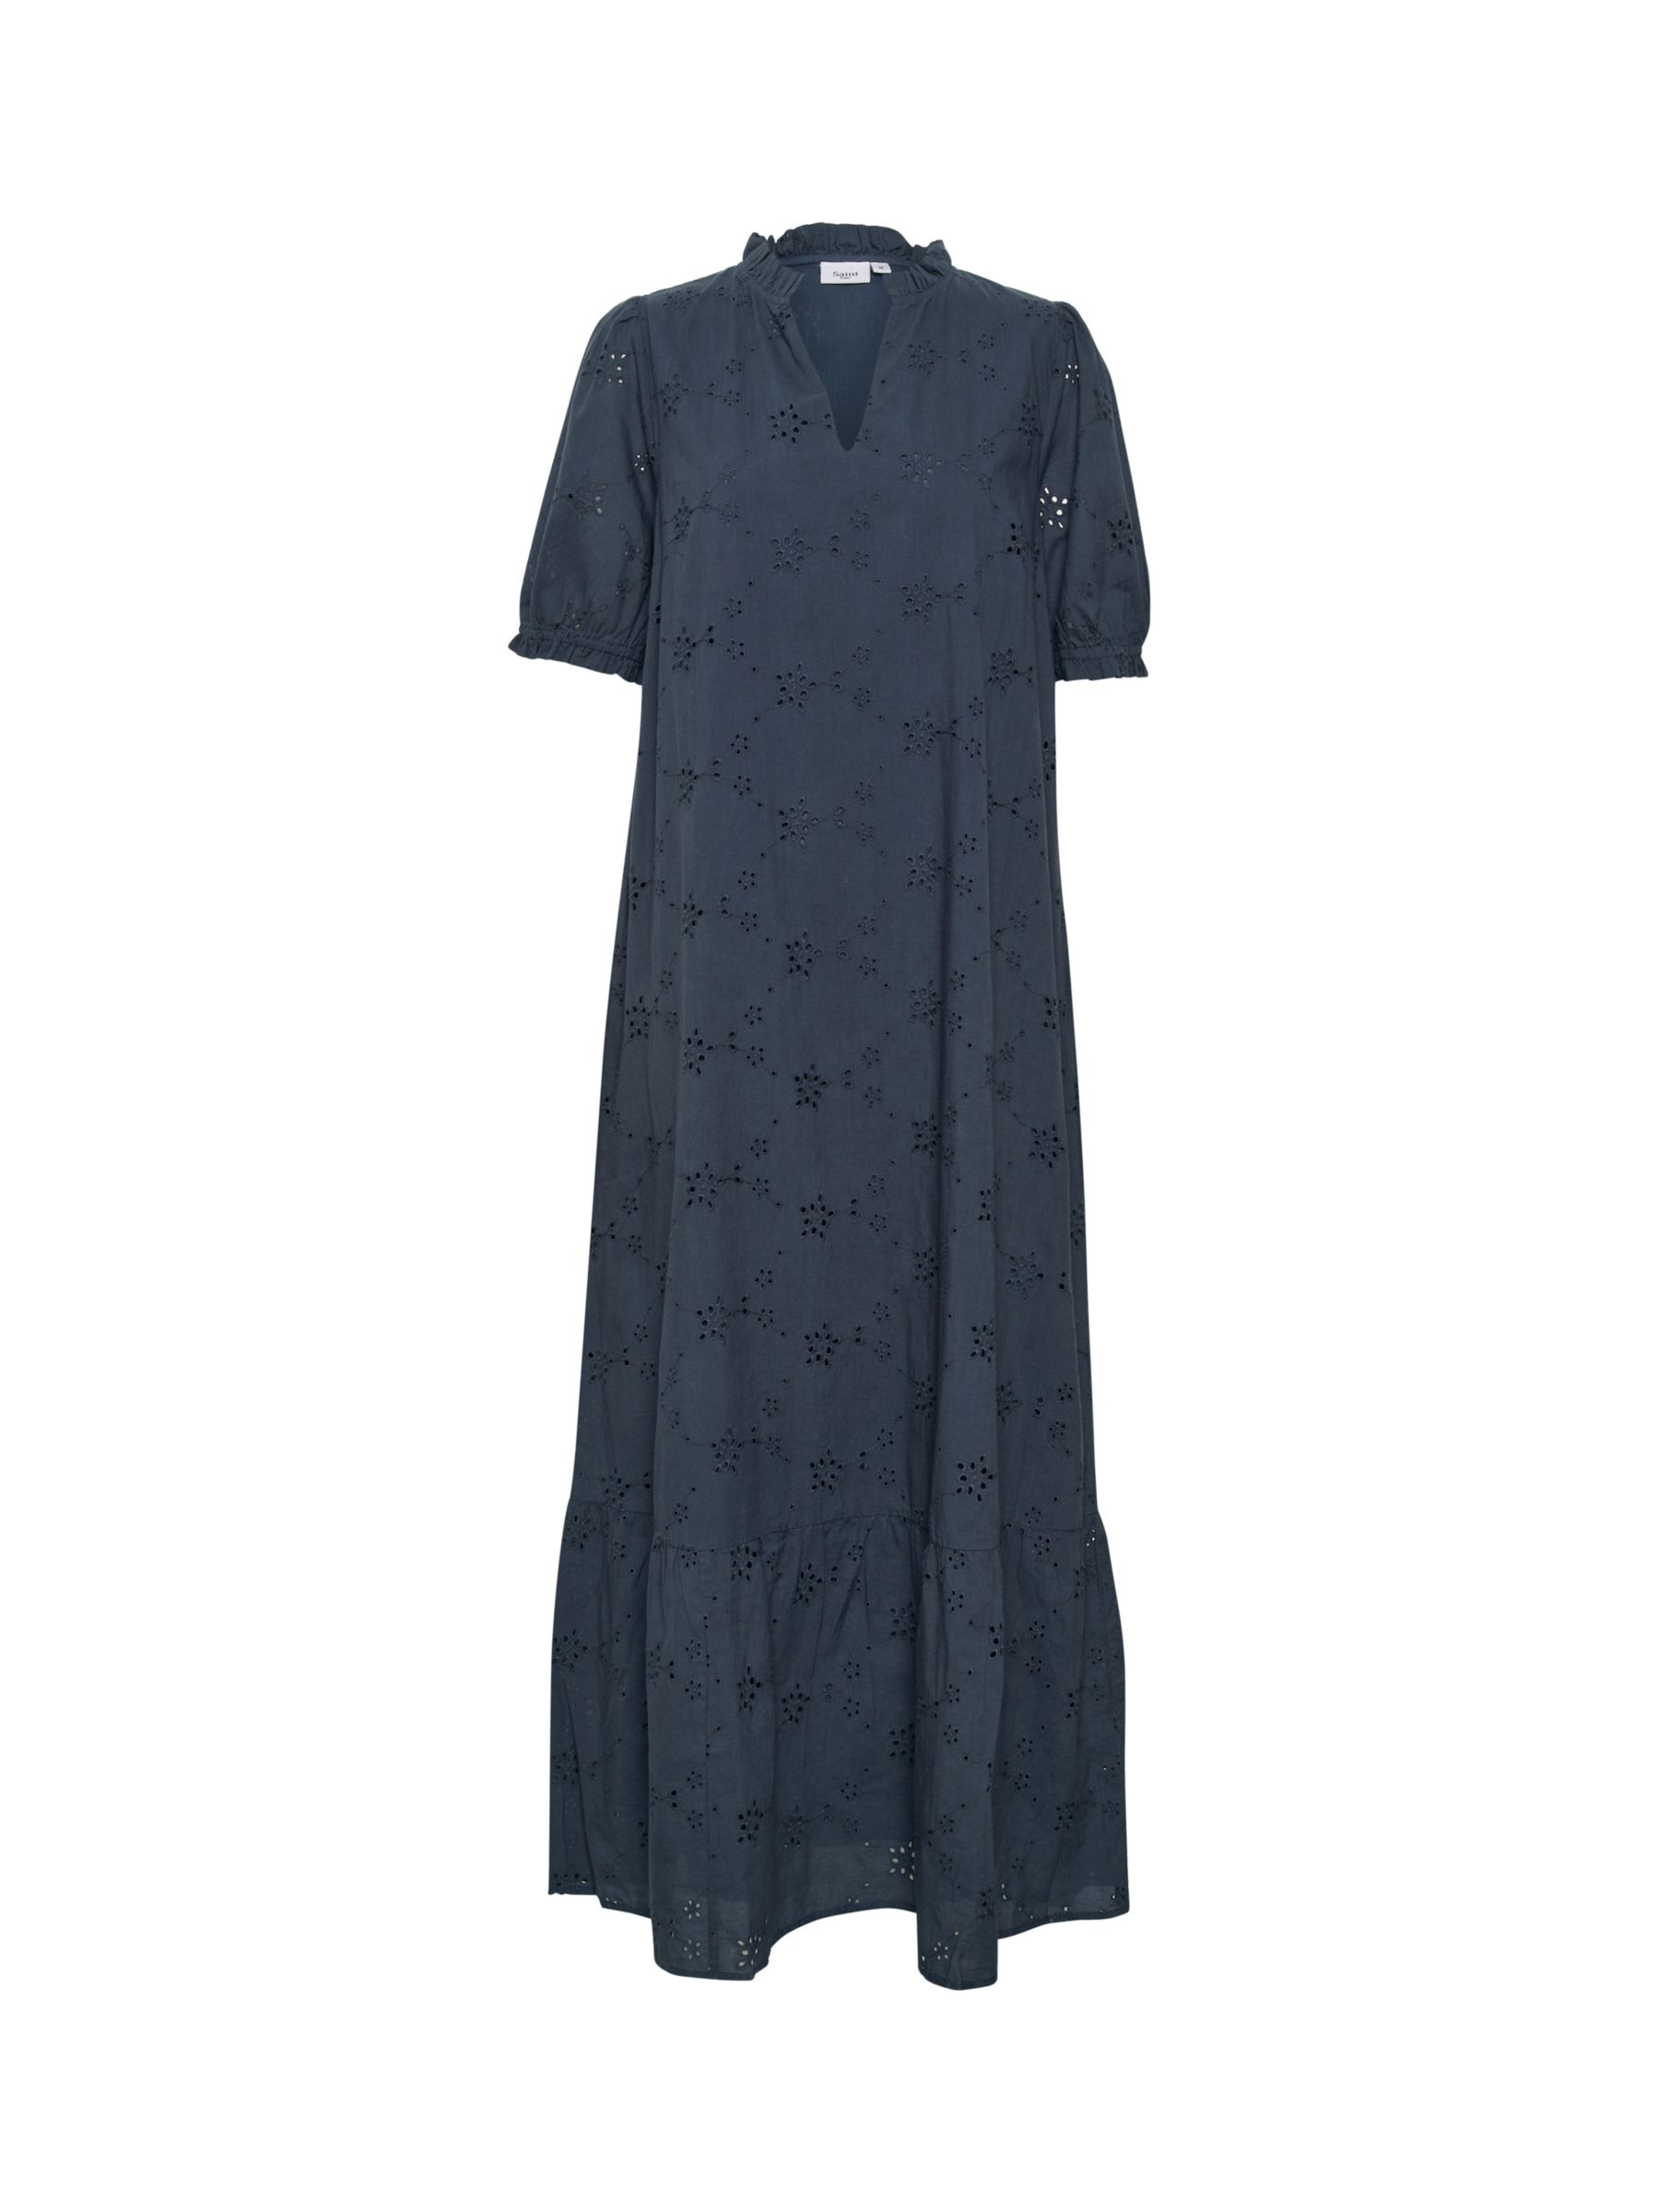 Saint Tropez Velor Broderie Anglaise Dress, Ombre Blue at John Lewis ...